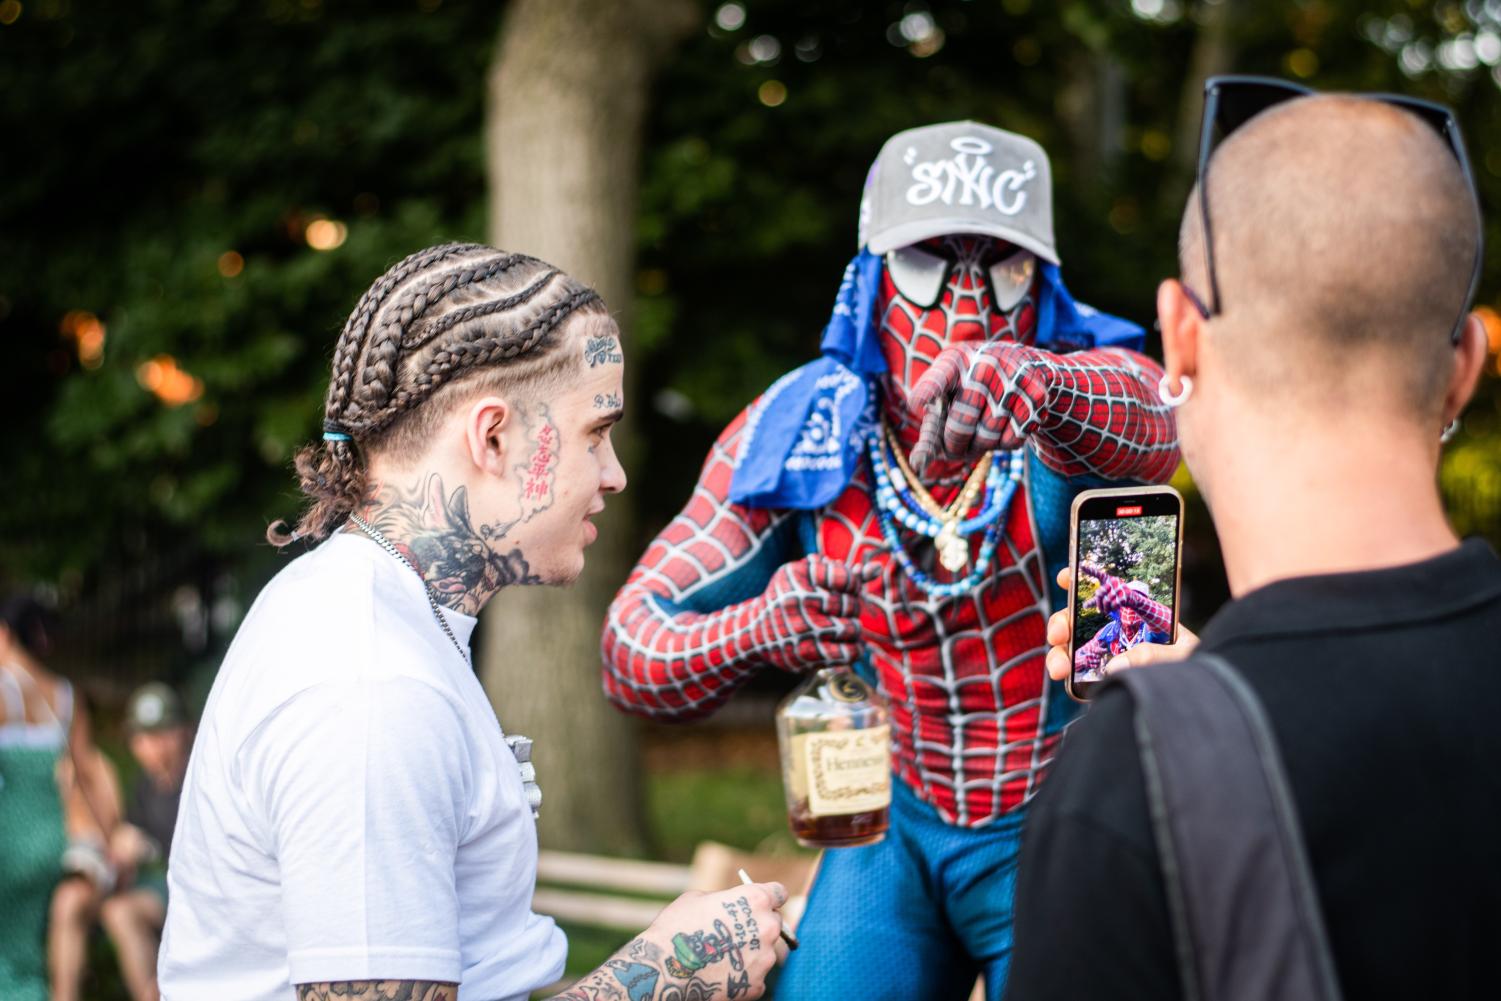 A man in a black shirt records an iPhone video of a man in a red-and-blue Spiderman costume in front of him. To the left, a man with a white shirt and tattoos on his neck, face and arms.